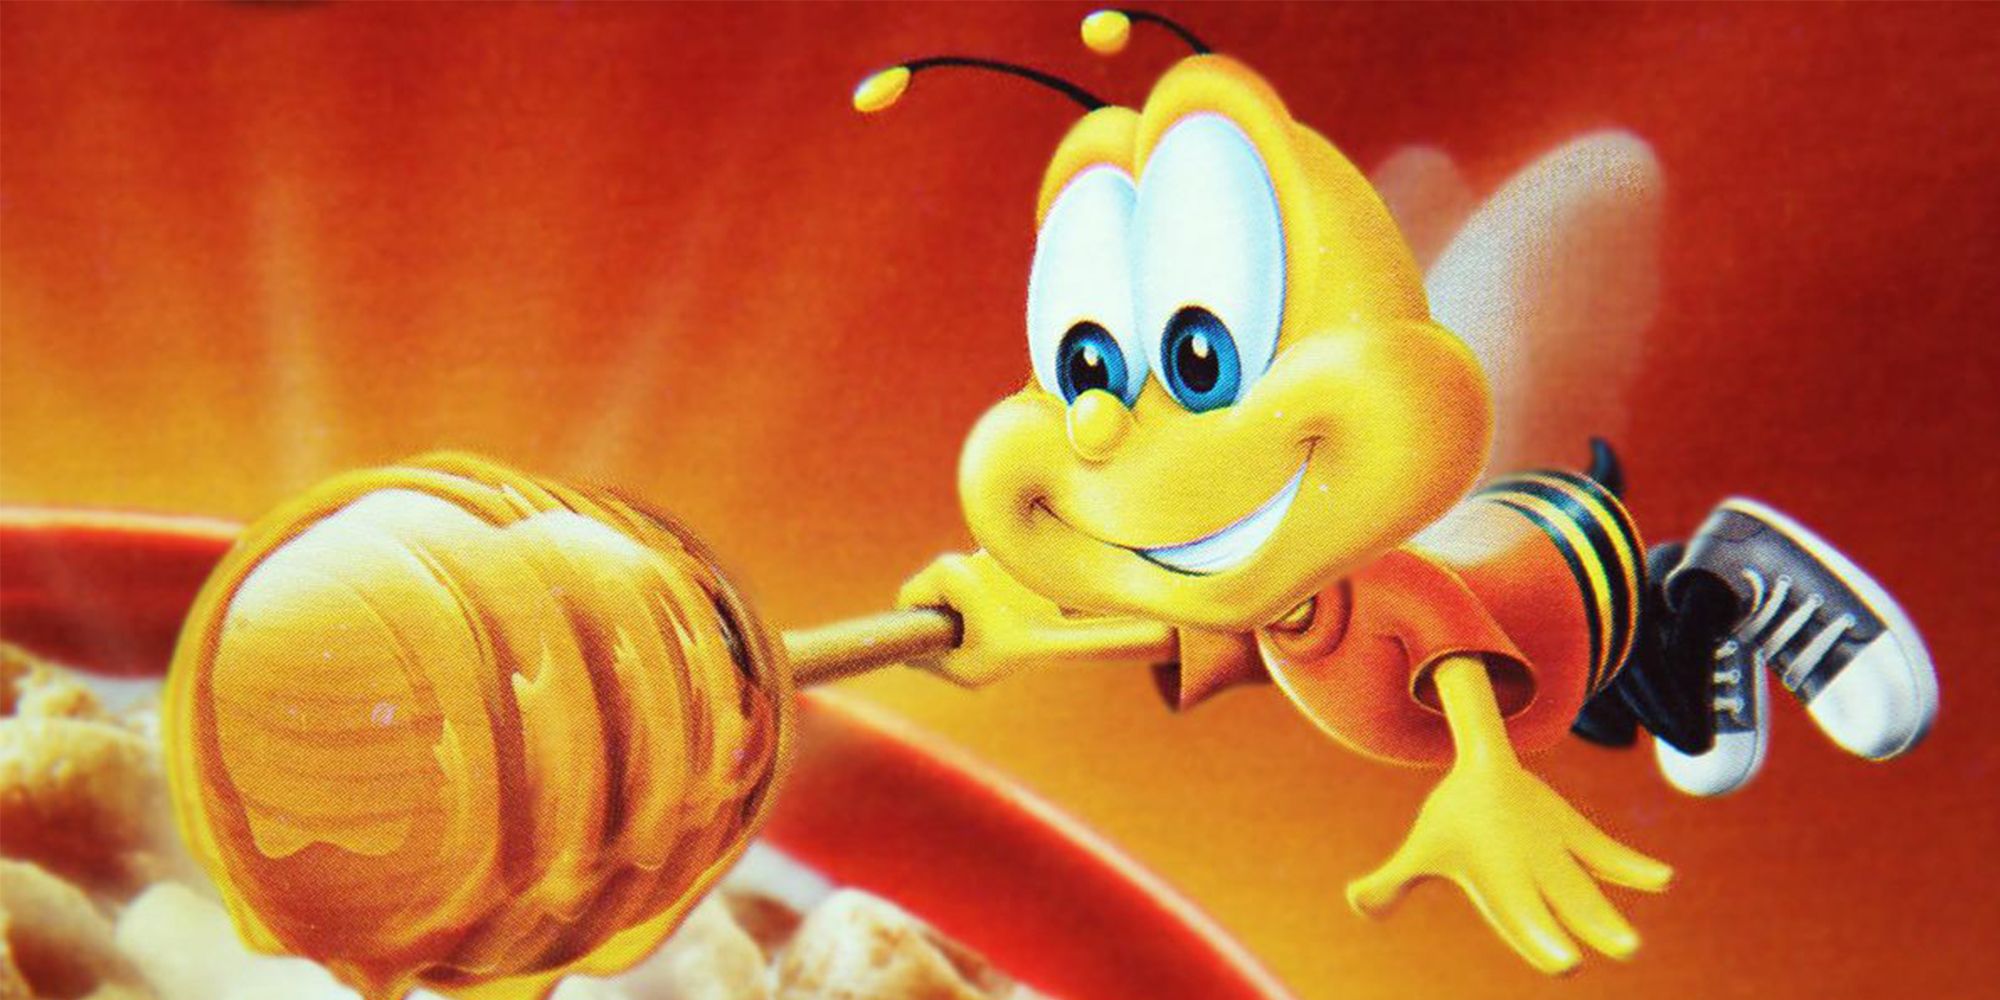 Buzz The Bee adds a dollop of honey onto a bowl of Honey Nut Cheerios.